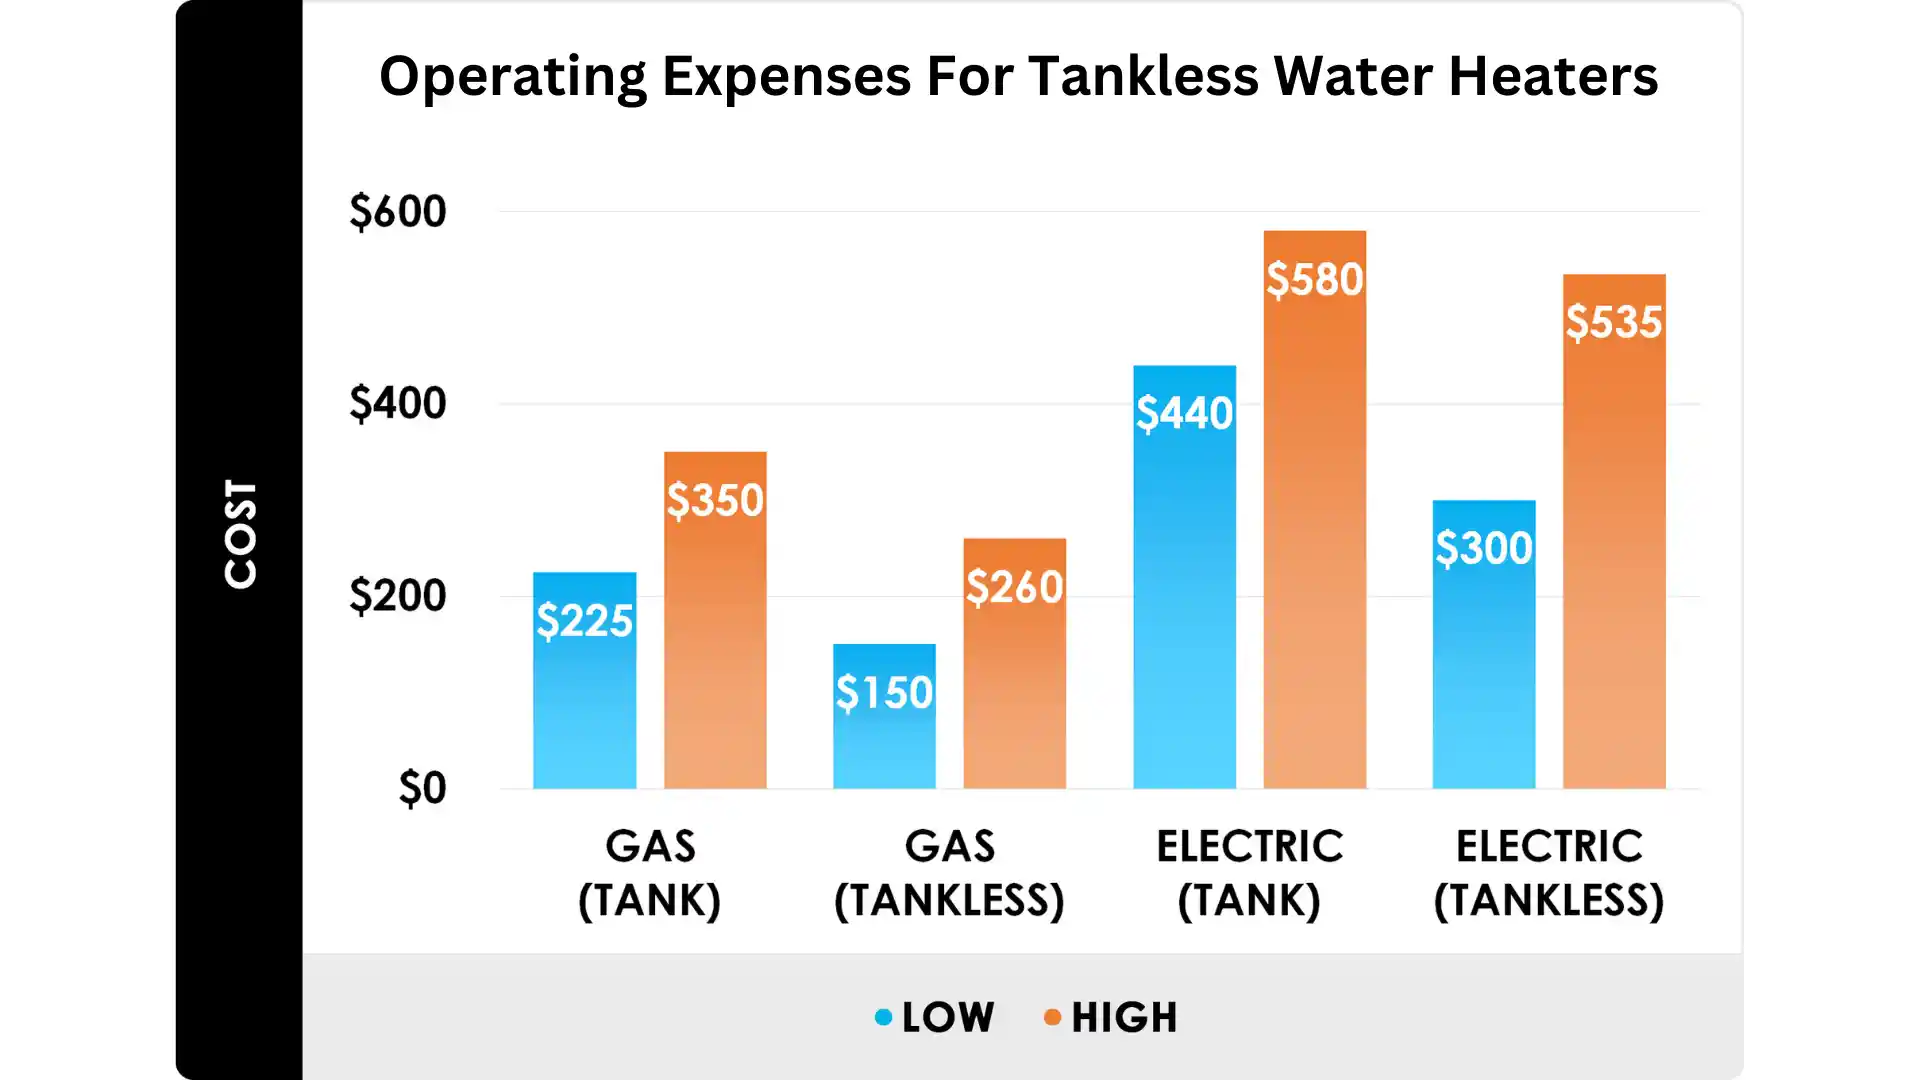 Operating Expenses For Tankless Water Heaters